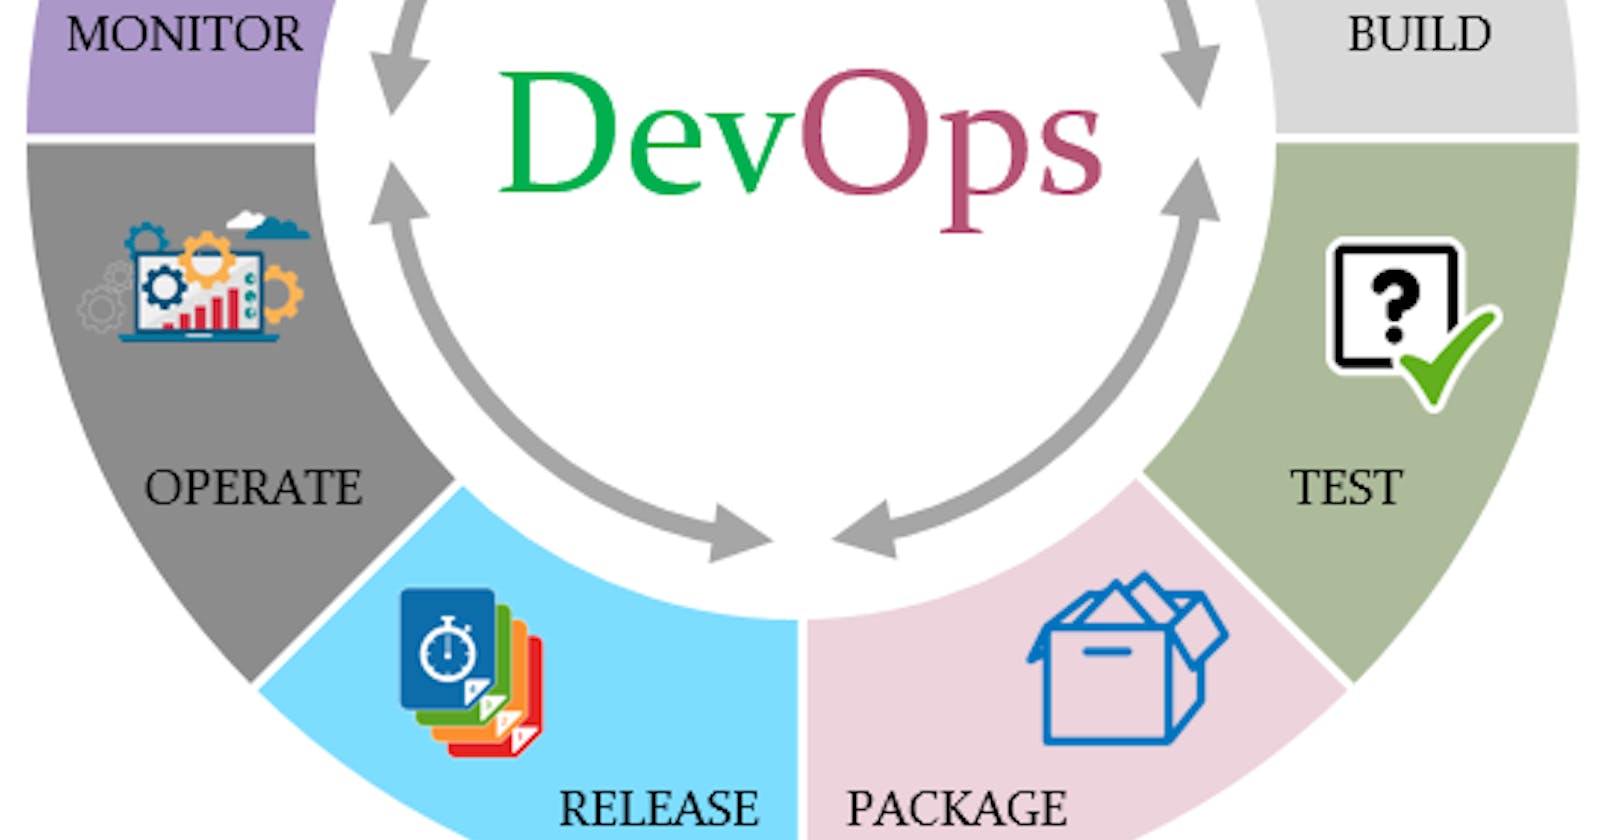 Getting started with DevOps